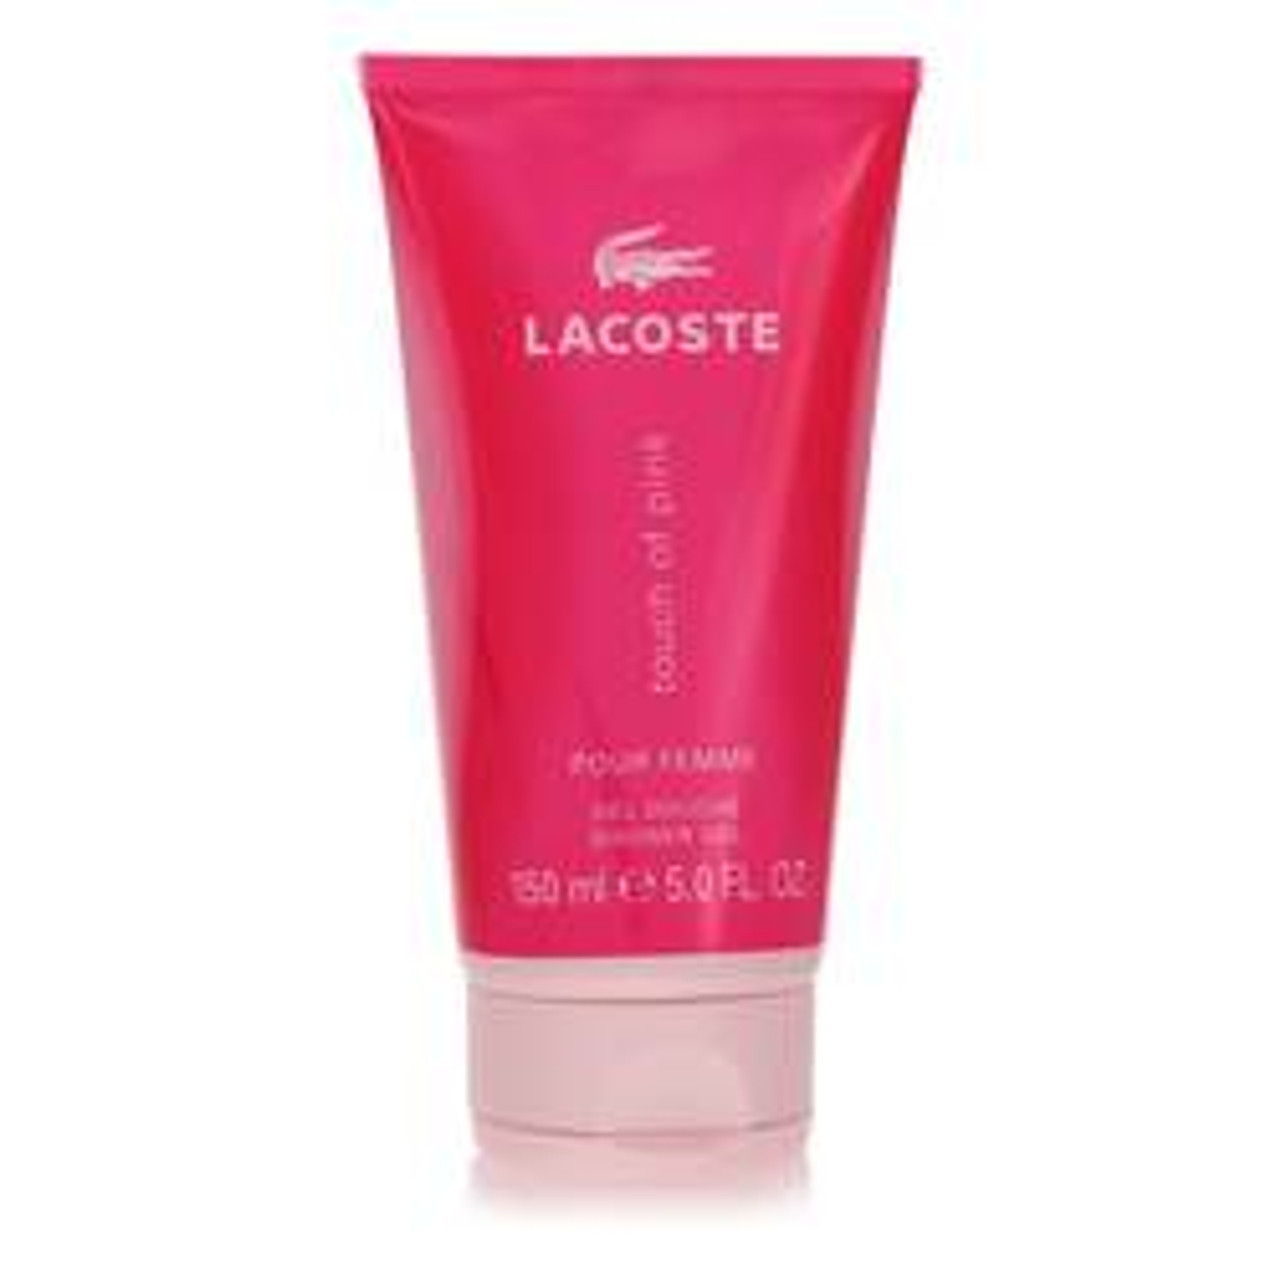 Touch Of Pink Perfume By Lacoste Shower Gel (unboxed) 5 oz for Women - [From 59.00 - Choose pk Qty ] - *Ships from Miami